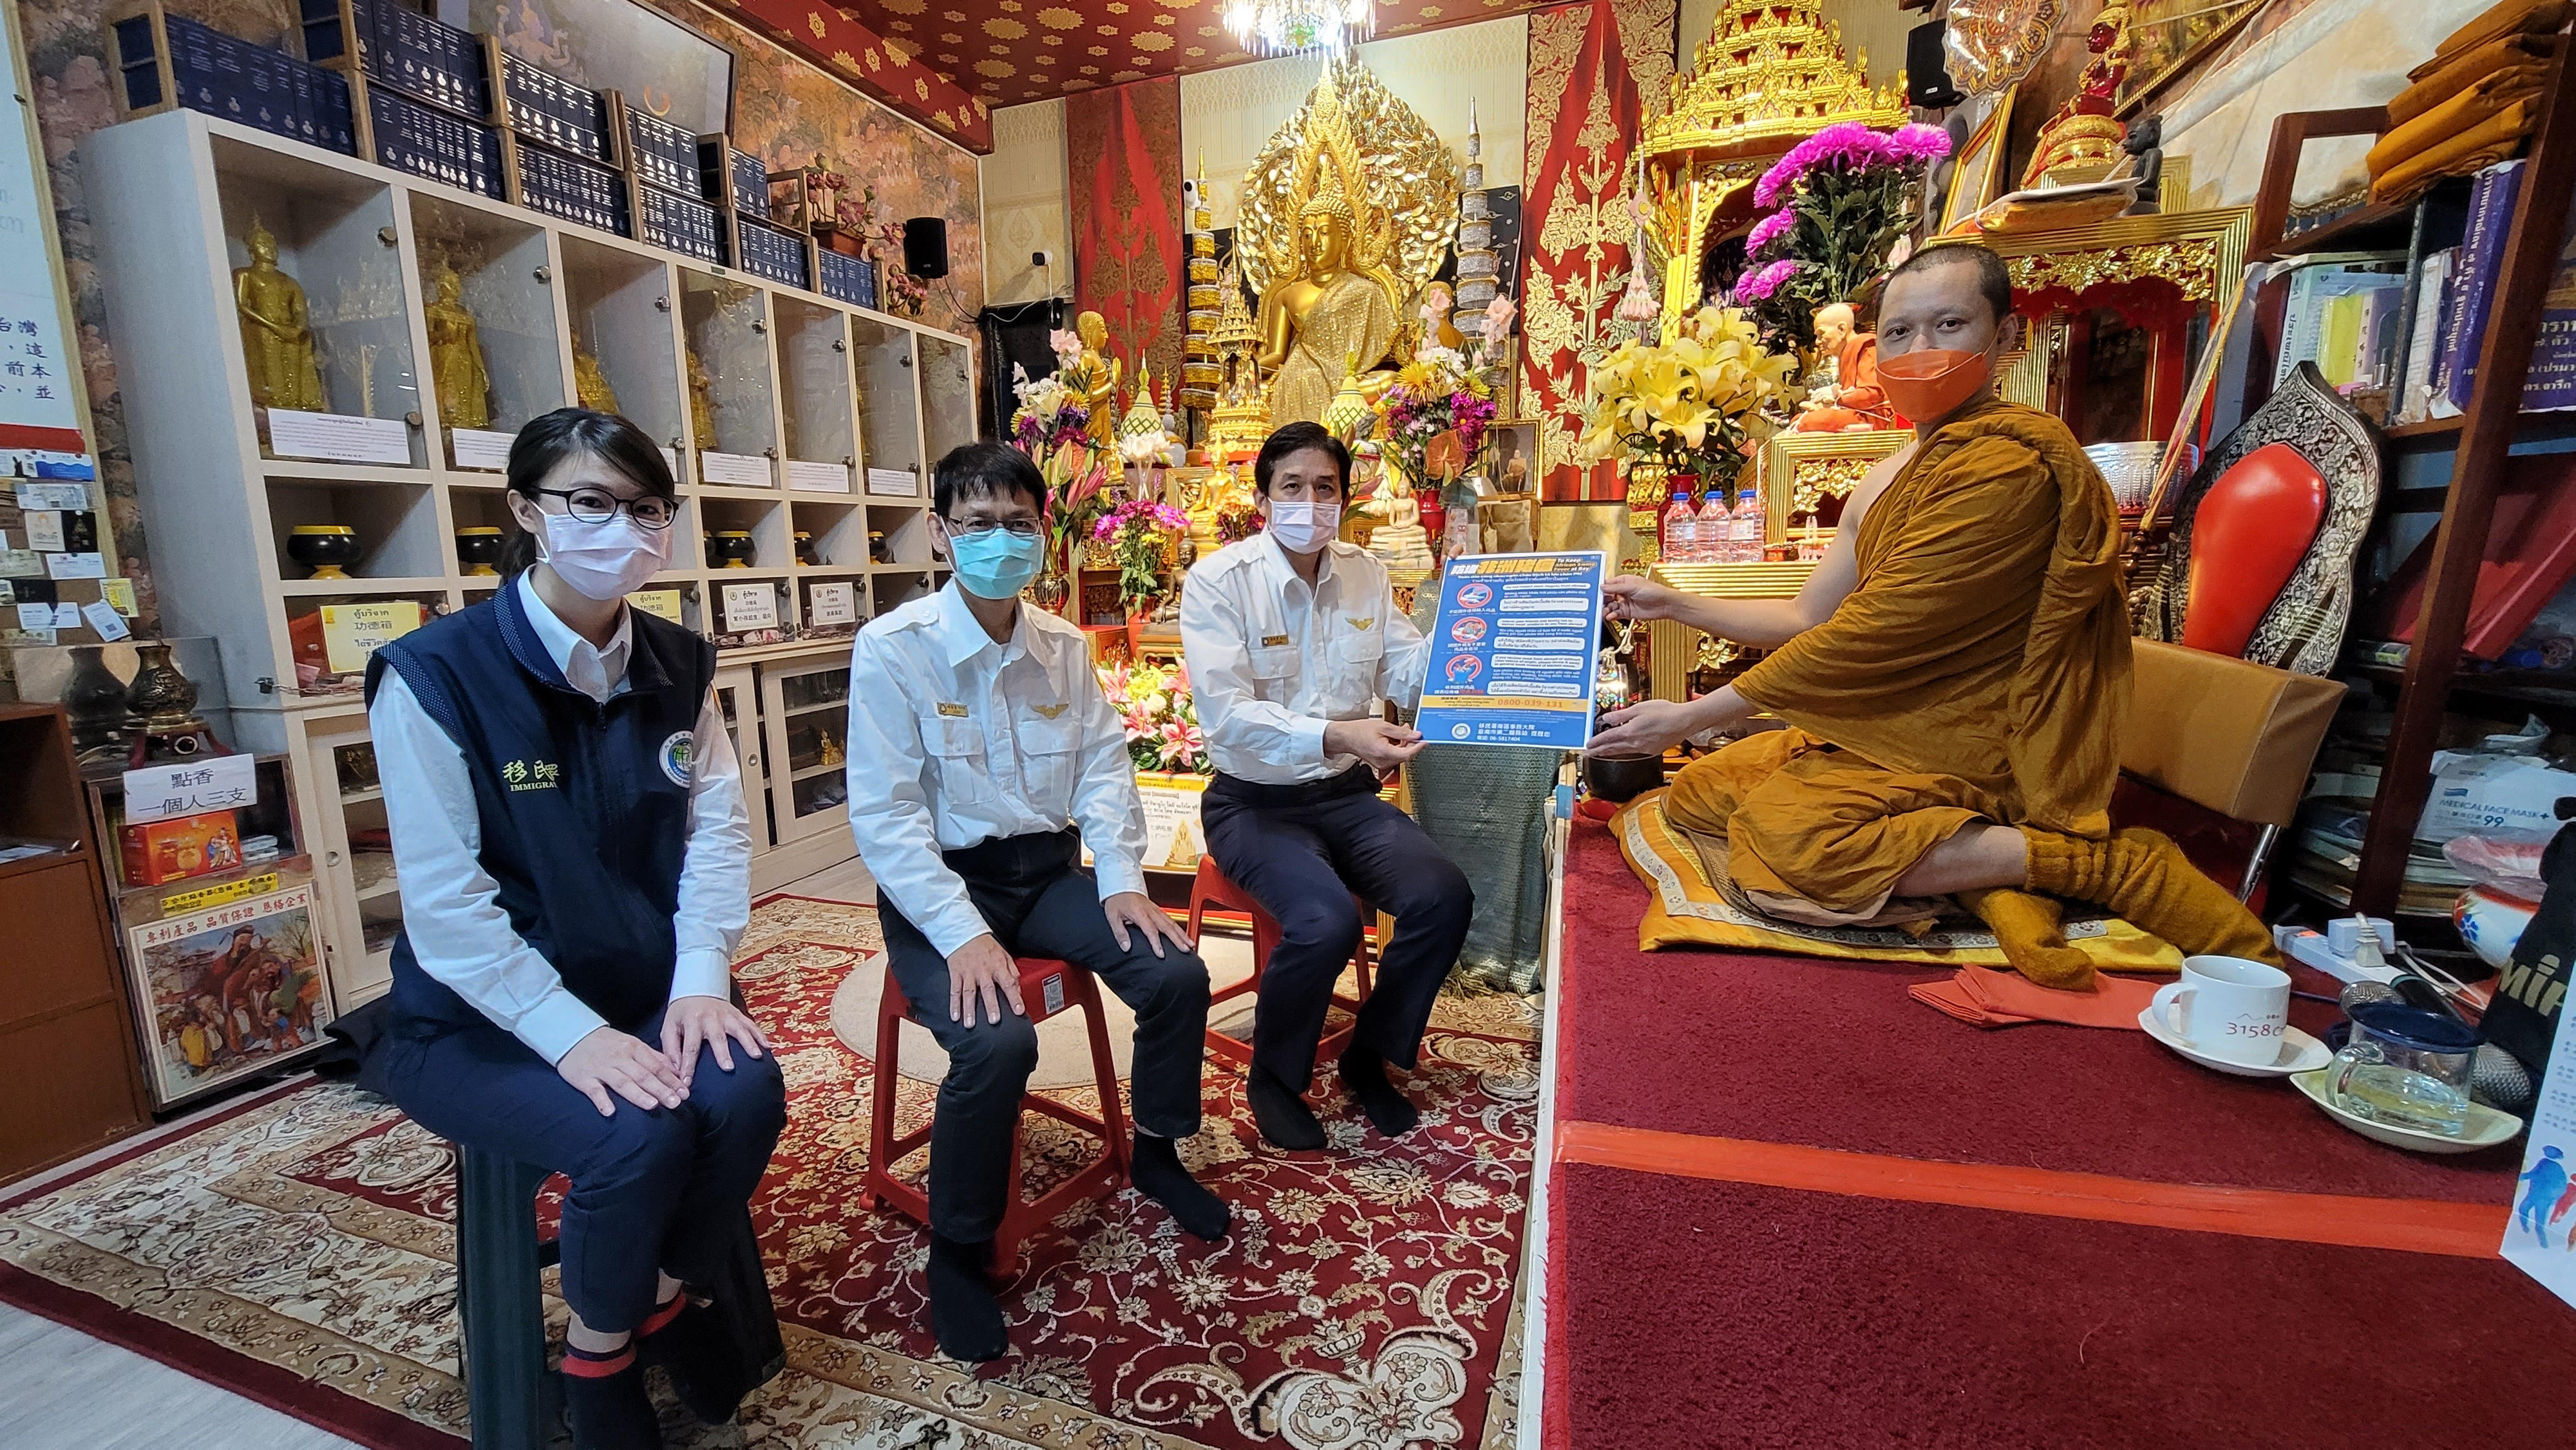 A Thai temple was invited to share relevant information to immigrants and migrant workers. (Photo / Provided by Tainan City Second Service Center)